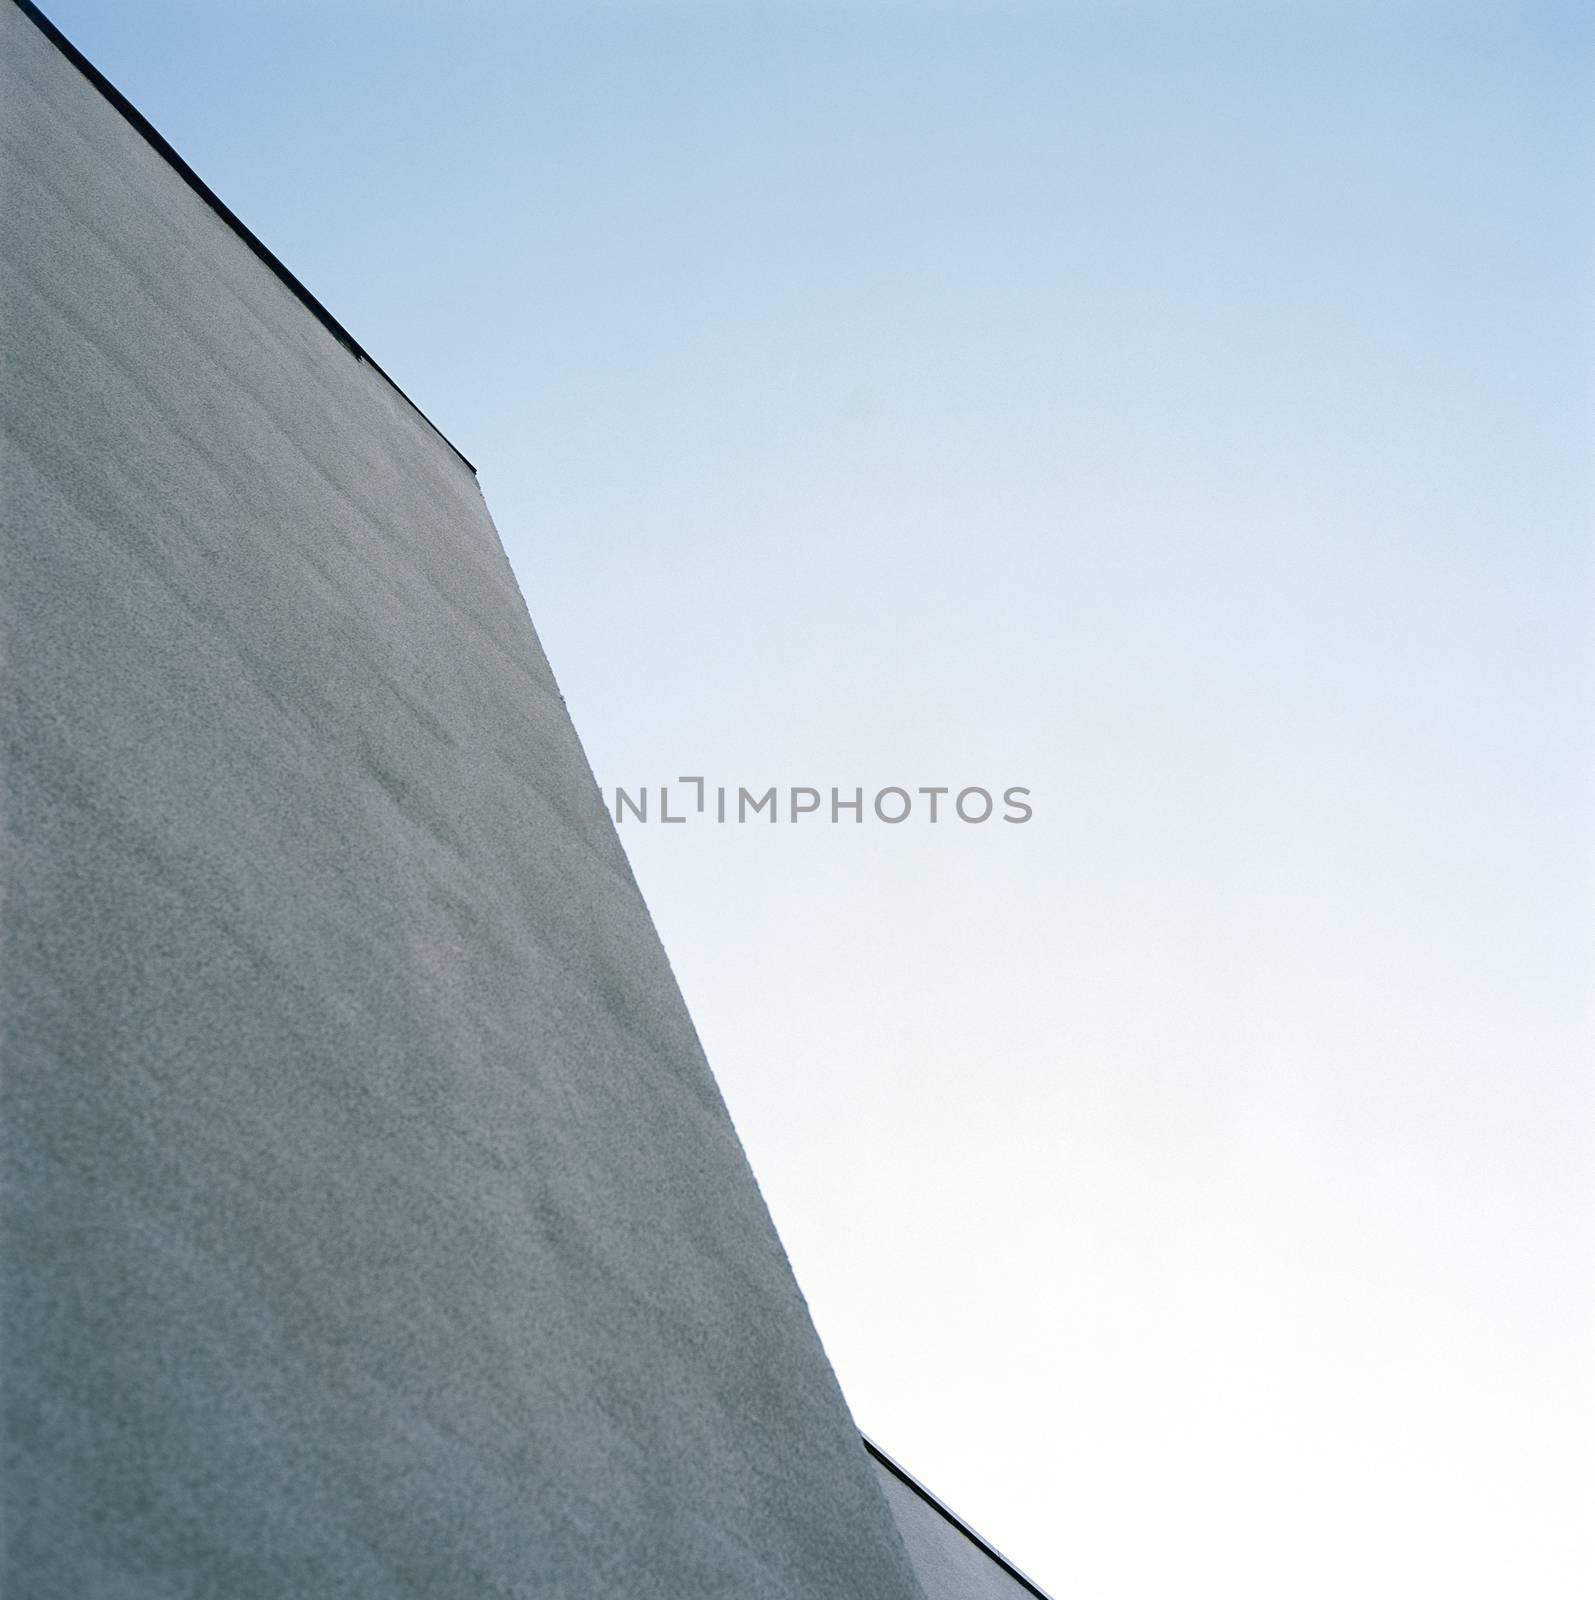 Looking up at the modern architecture of a monochromatic exterior wall 